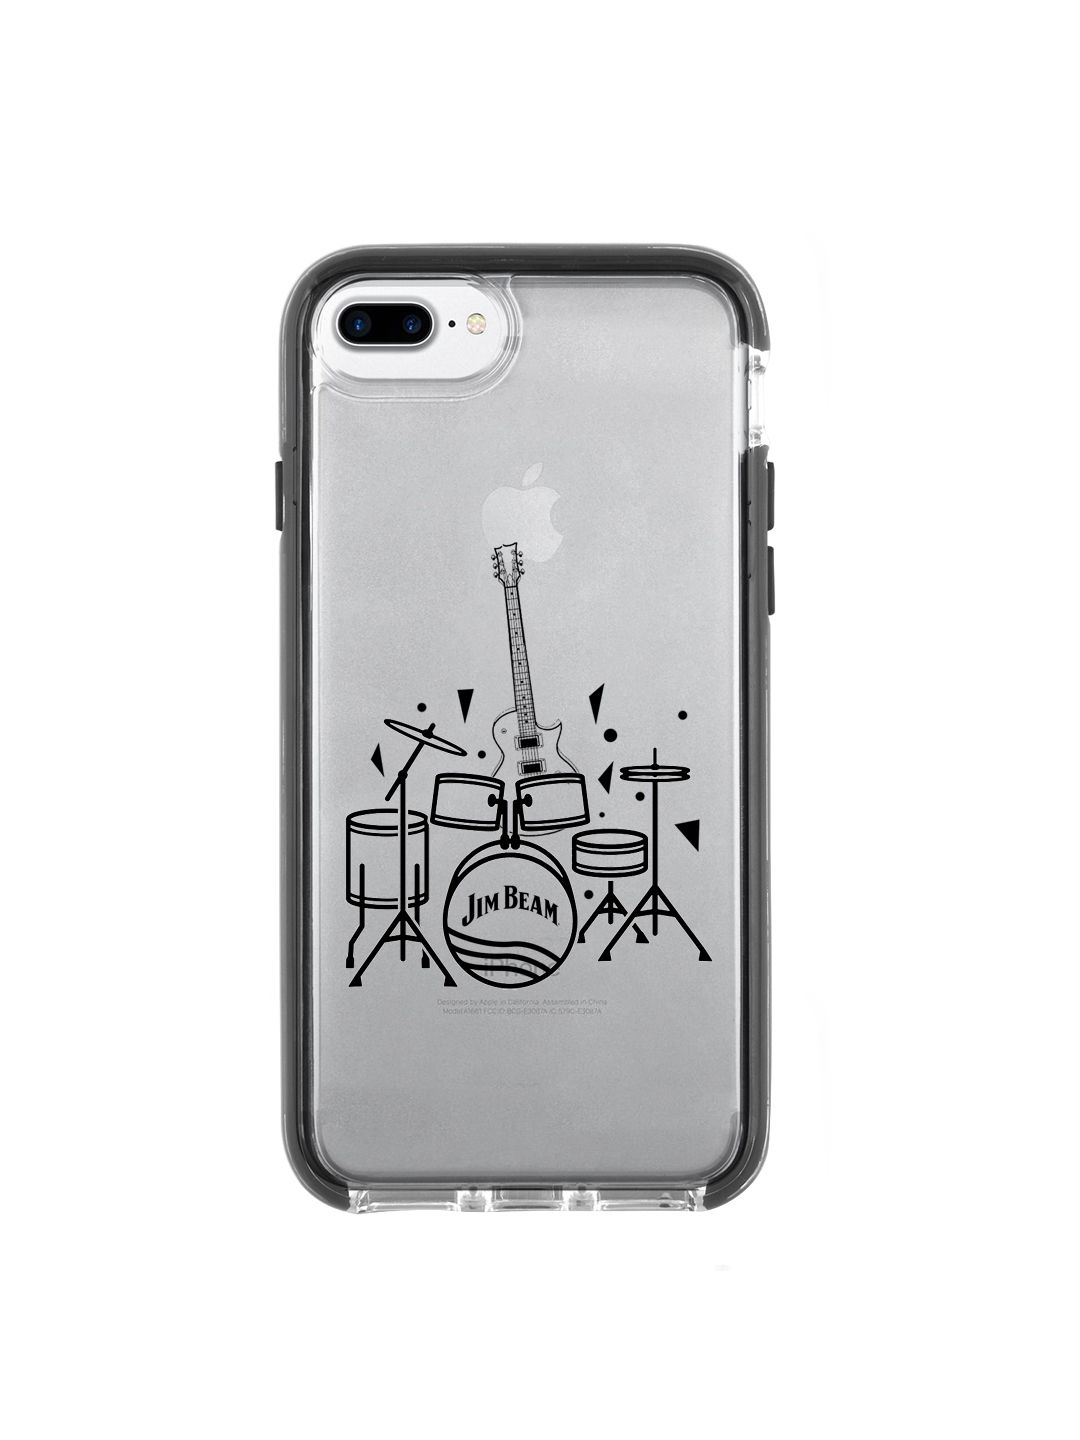 Jim Beam The Band - Shield Case for iPhone 7 Plus